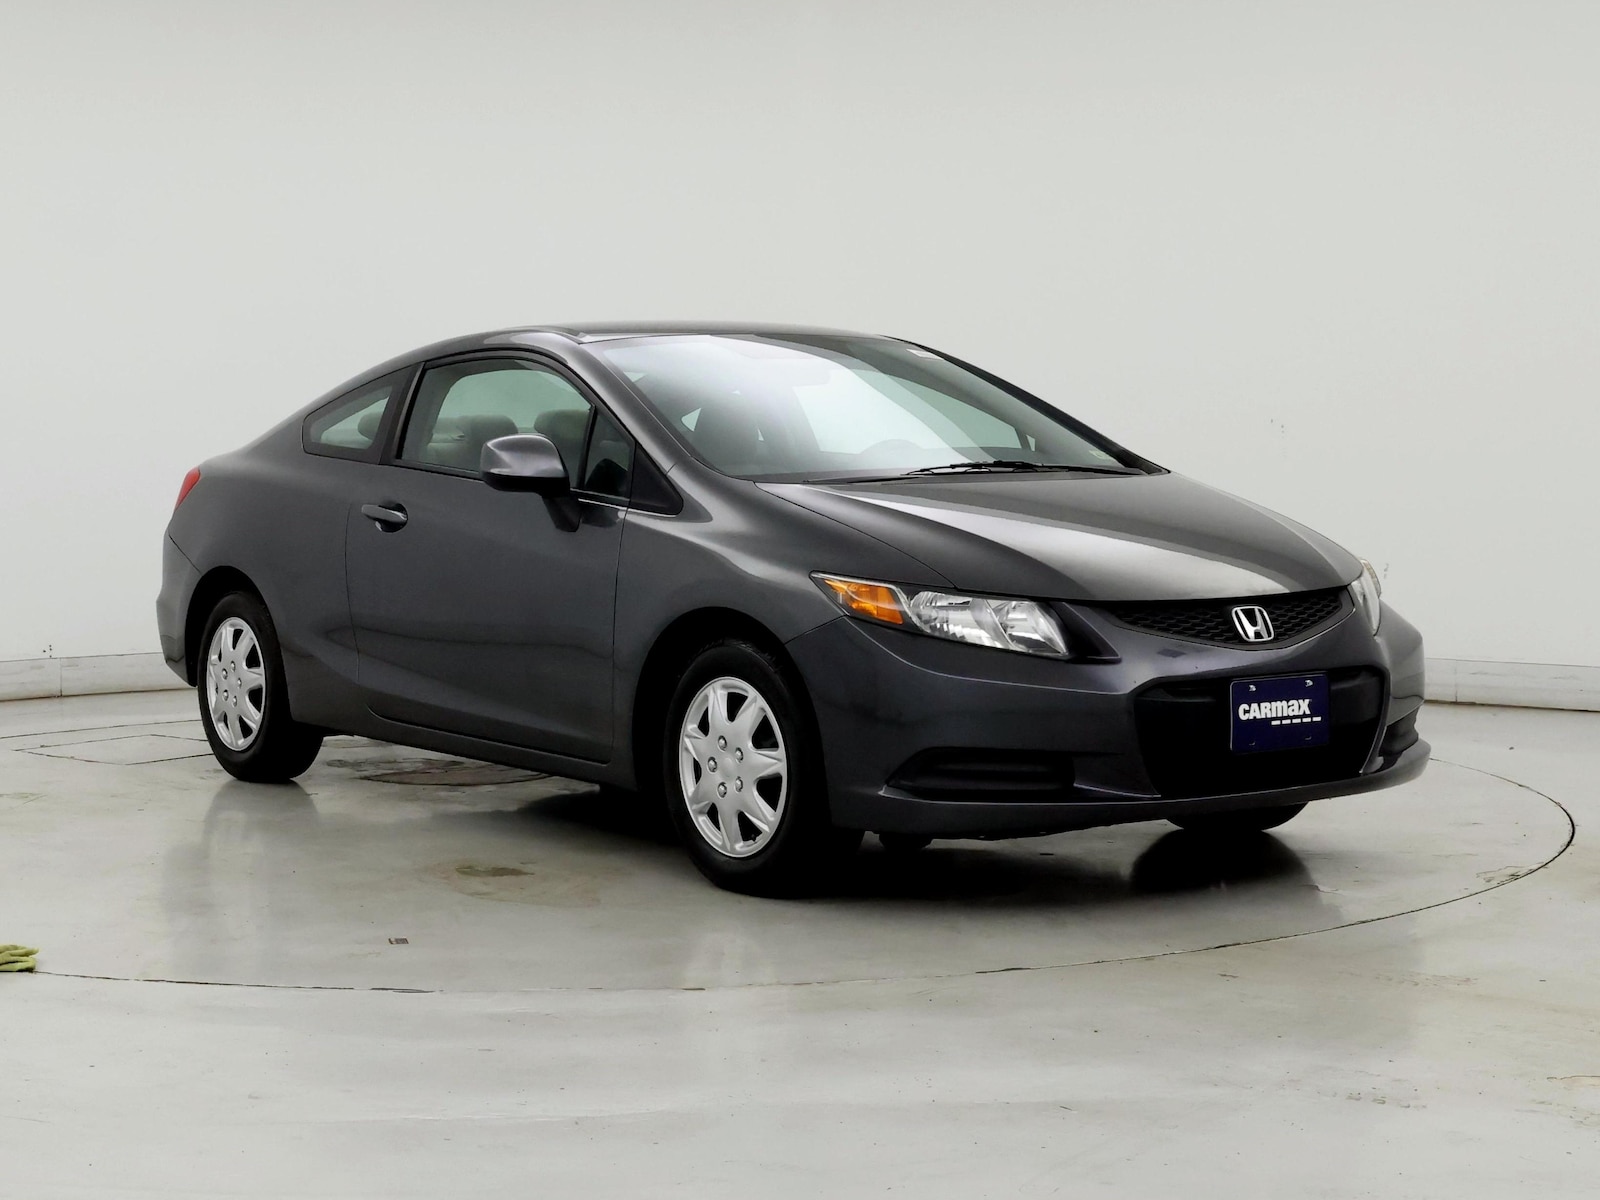 Used 2012 Honda Civic LX with VIN 2HGFG3B5XCH535371 for sale in Spokane Valley, WA